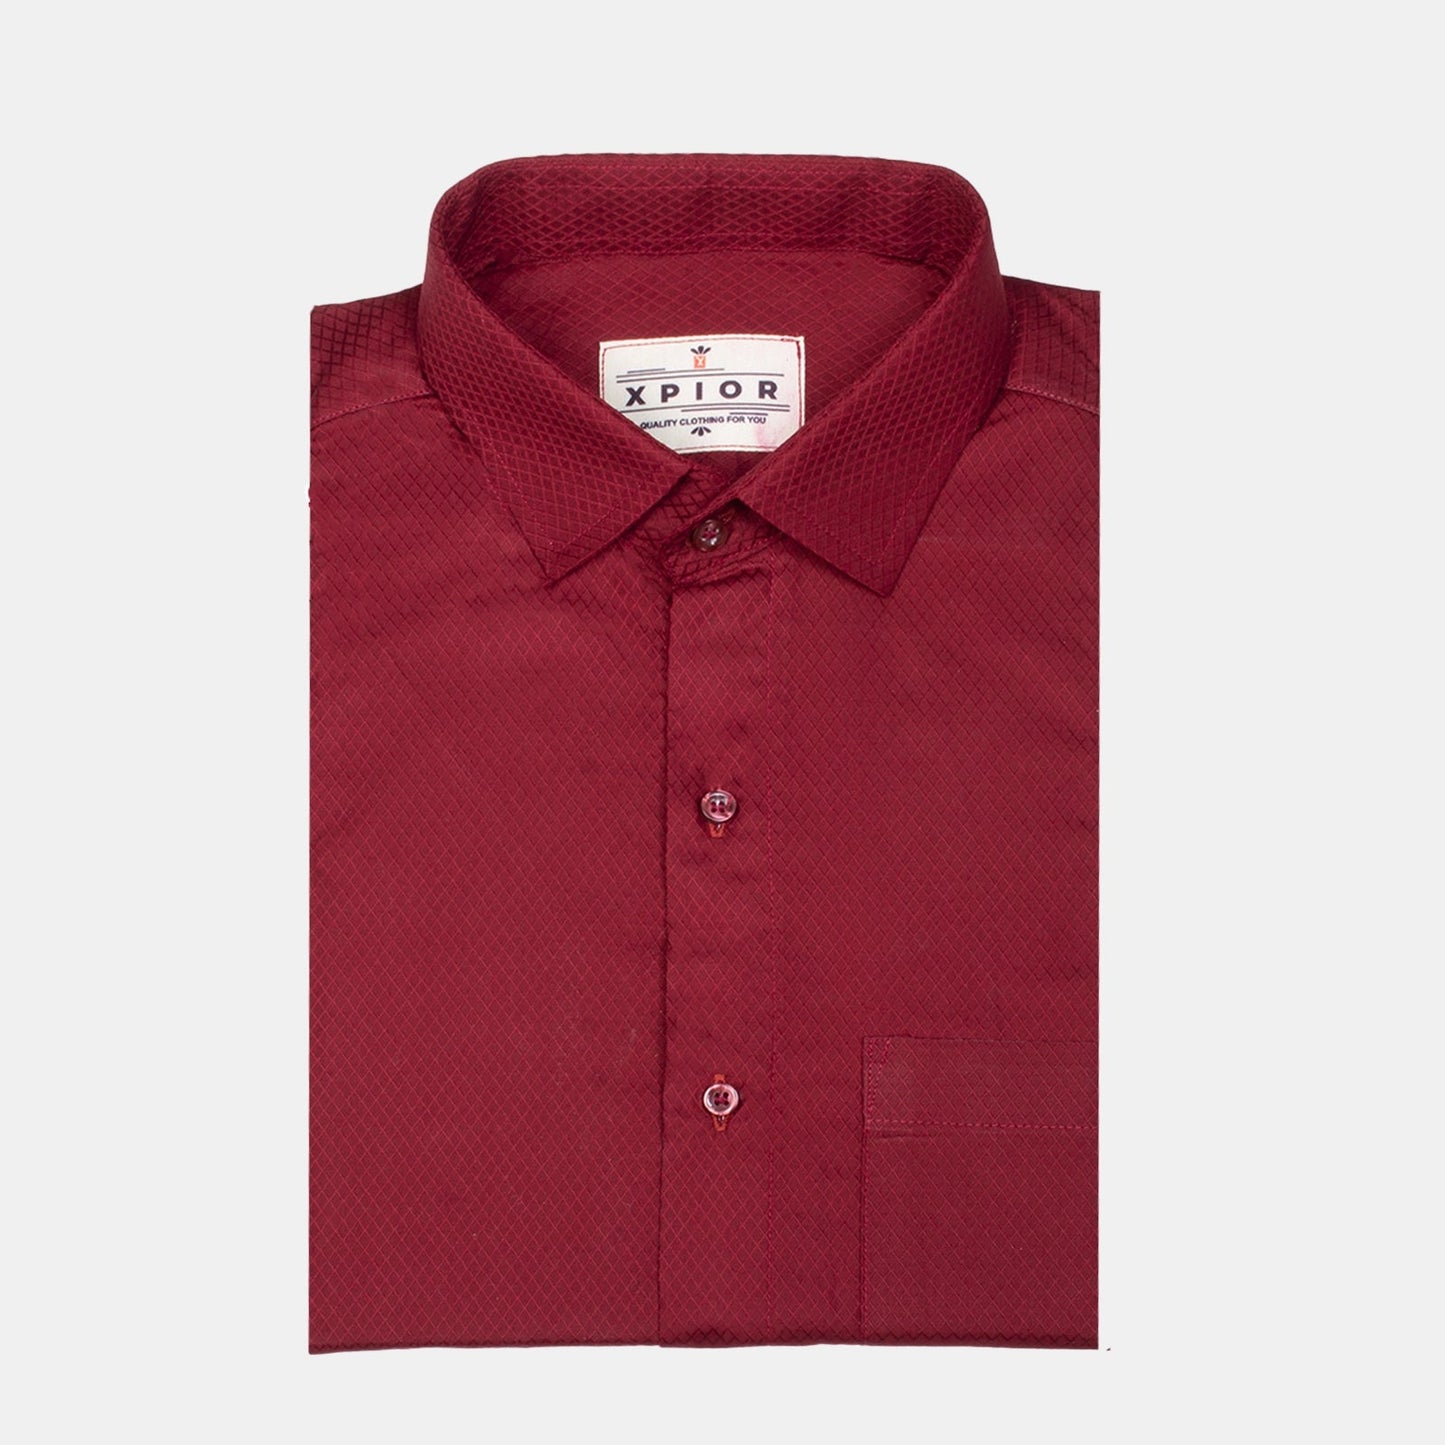 Visionary Men's Full Sleeves Plain Formal Shirt Premium Collection Cotton Fabric Maroon